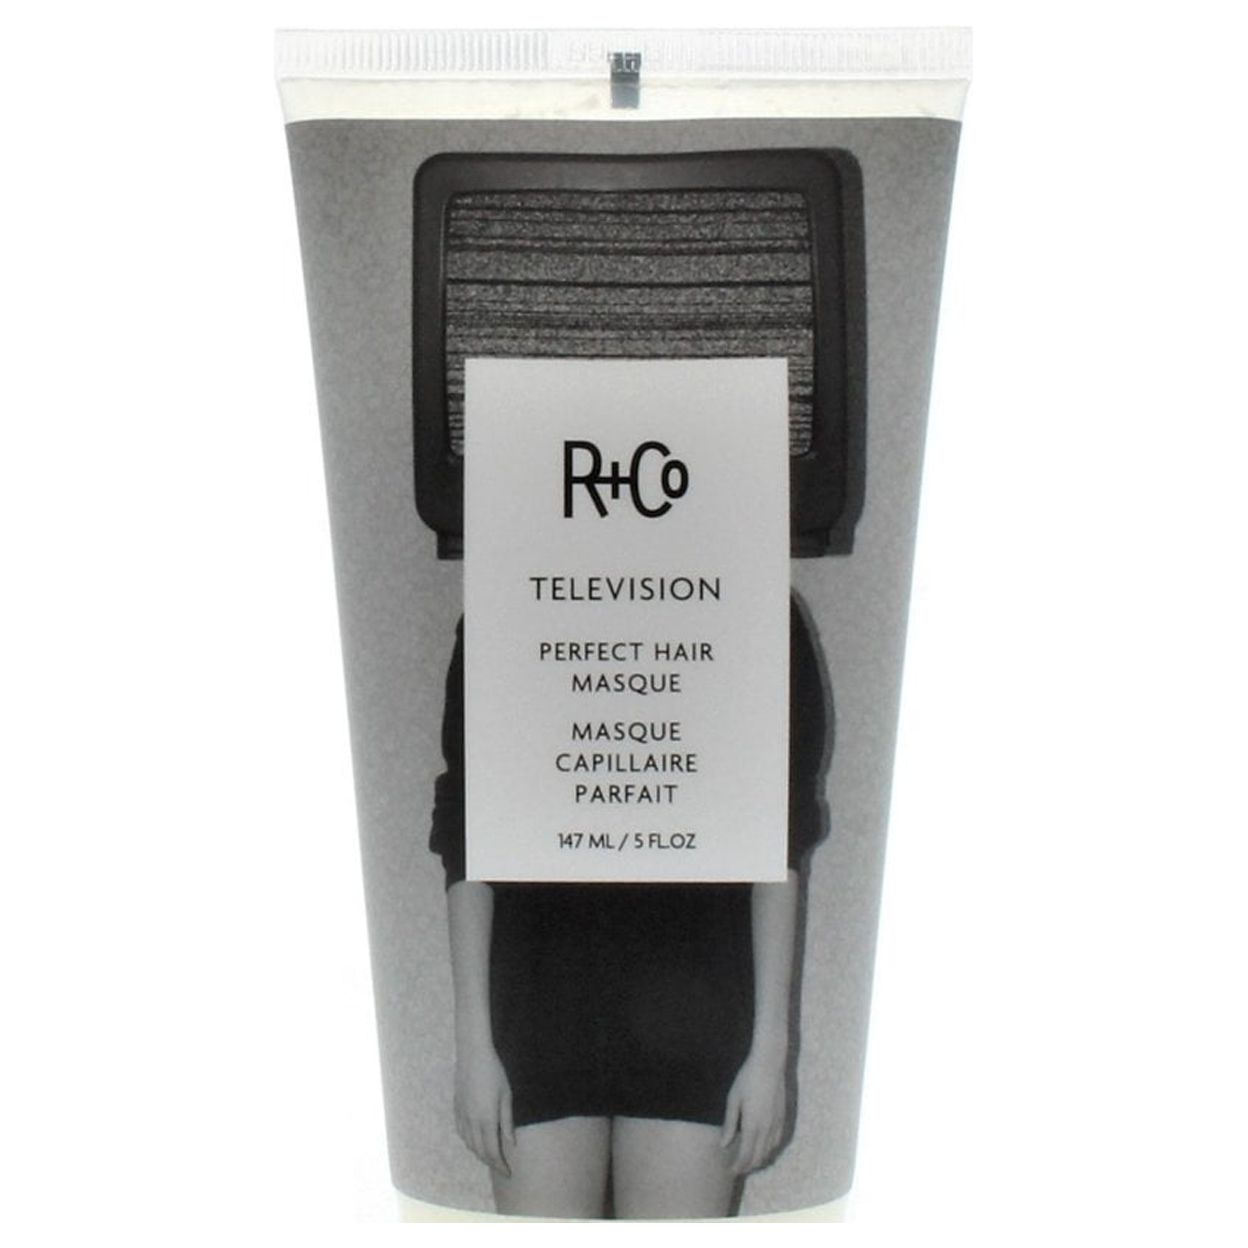 R+Co Television Perfect Hair Masque, 5 oz Masque - image 1 of 3